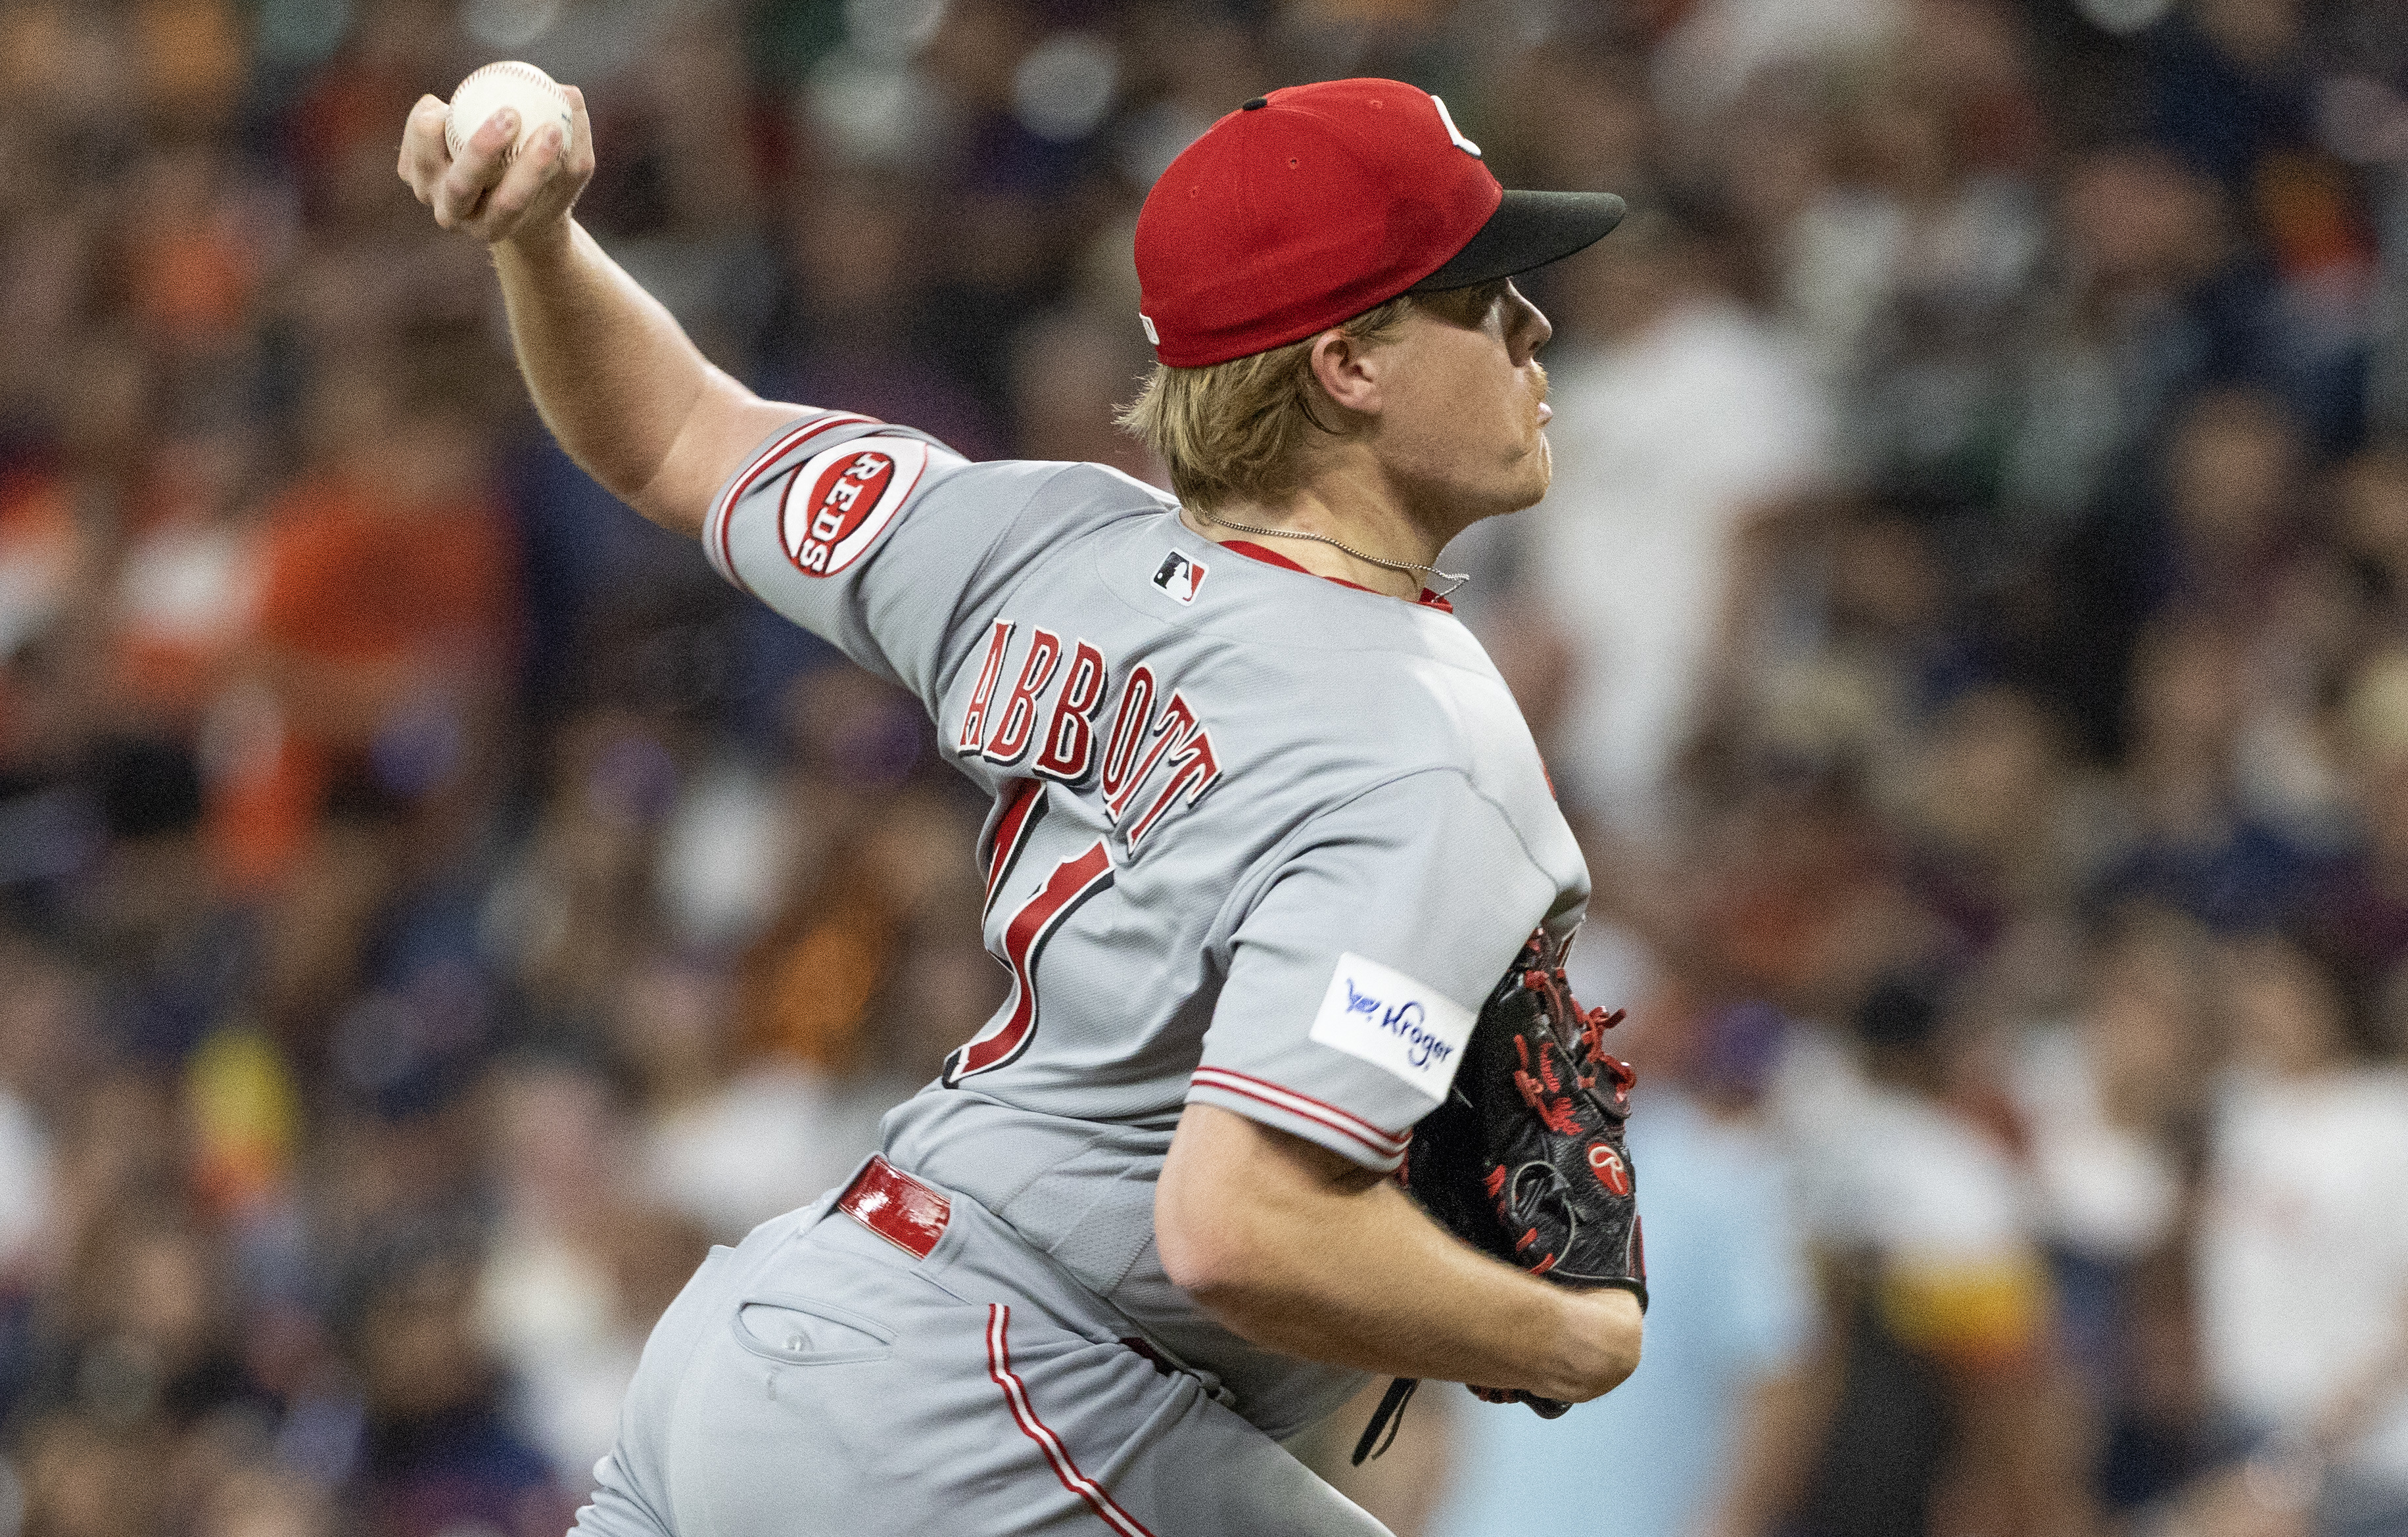 Rookie Andrew Abbott improves to 4-0 for Cincinnati as Reds top